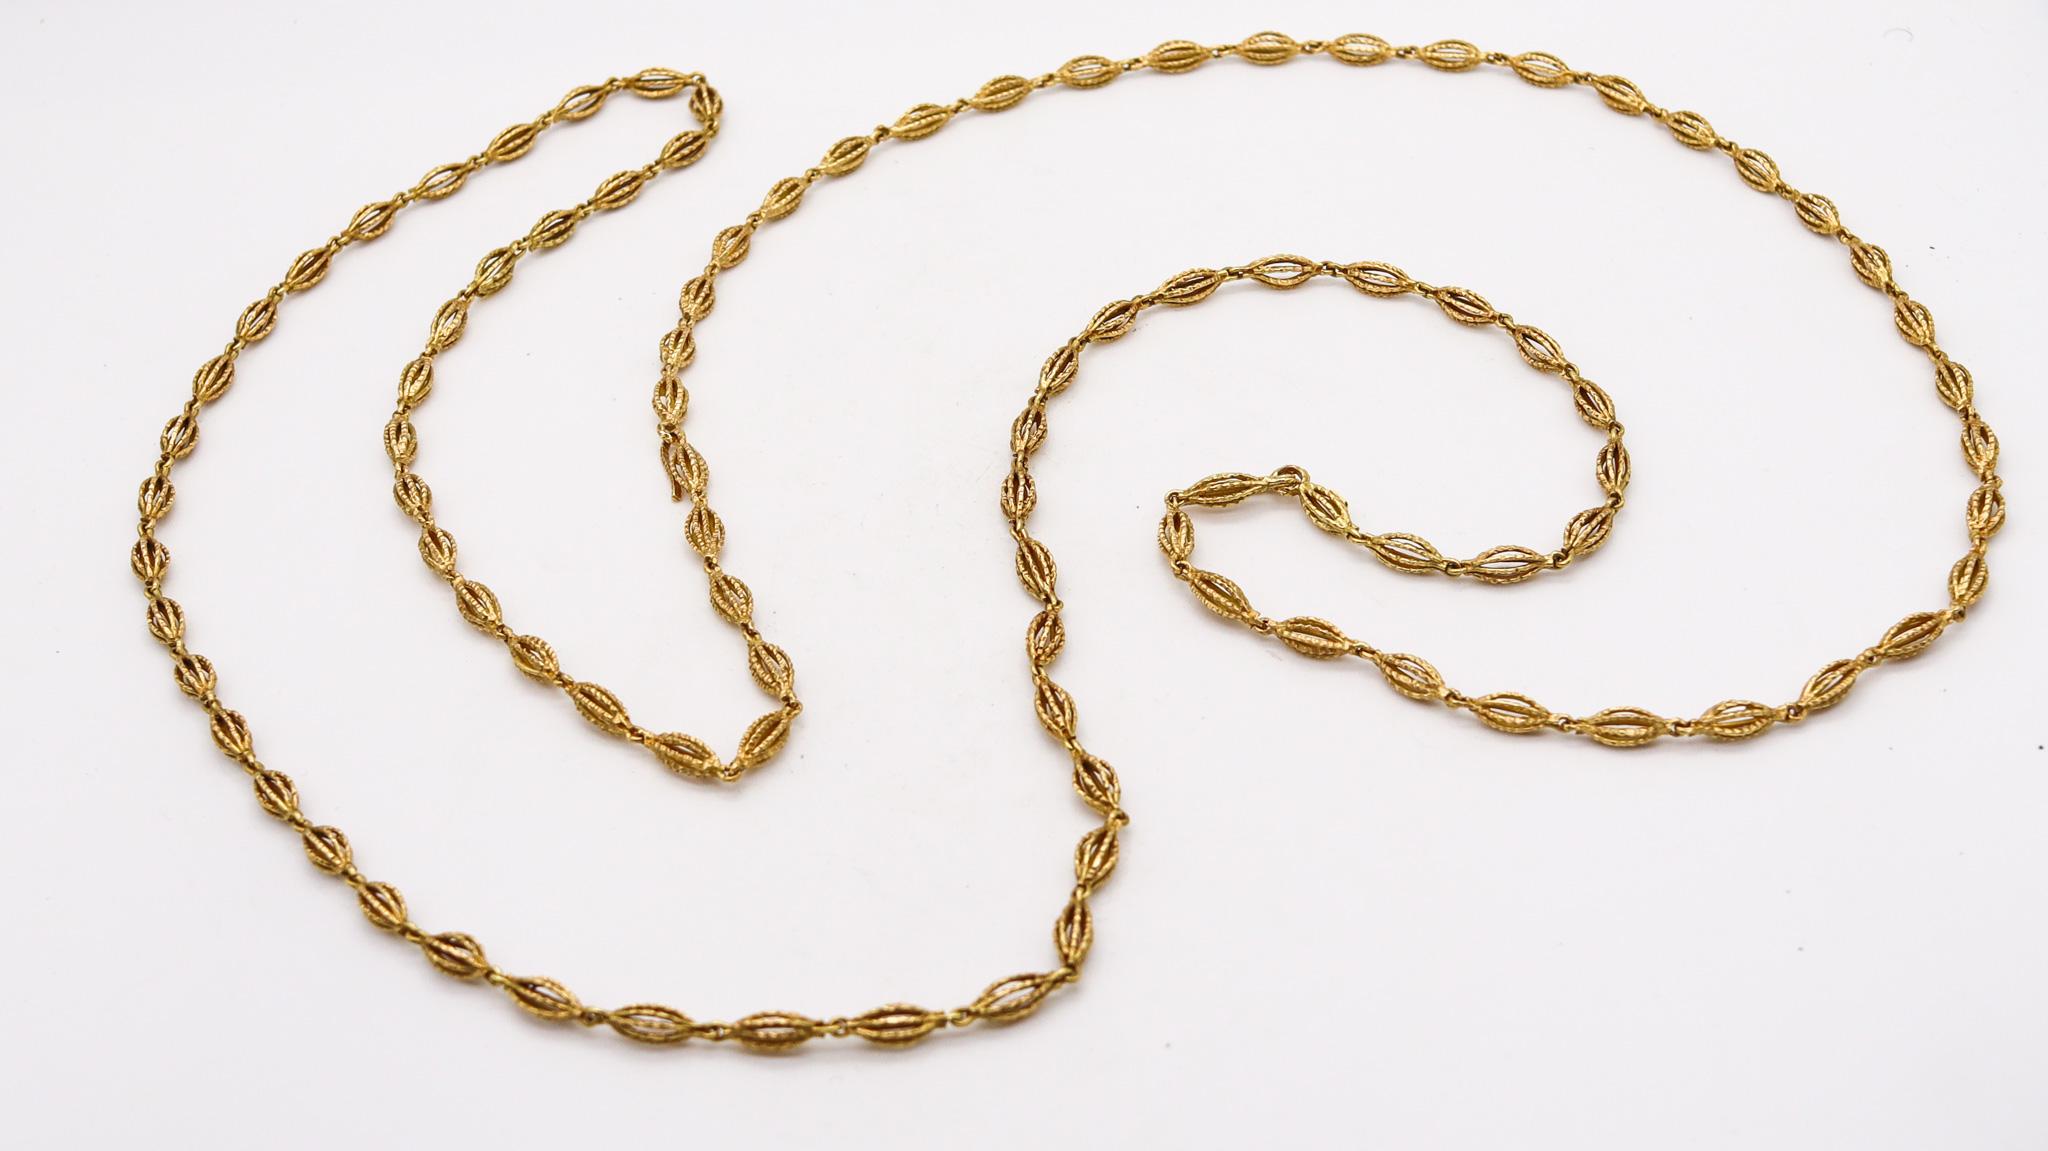 Chain designed by Andrew Grima for Omega Swiss.

An outstanding and very rare chain, created in London England by the iconic goldsmith and designer Andrew Grima, back in the 1969. This gorgeous chains has been specially crafted for the Omega Watch